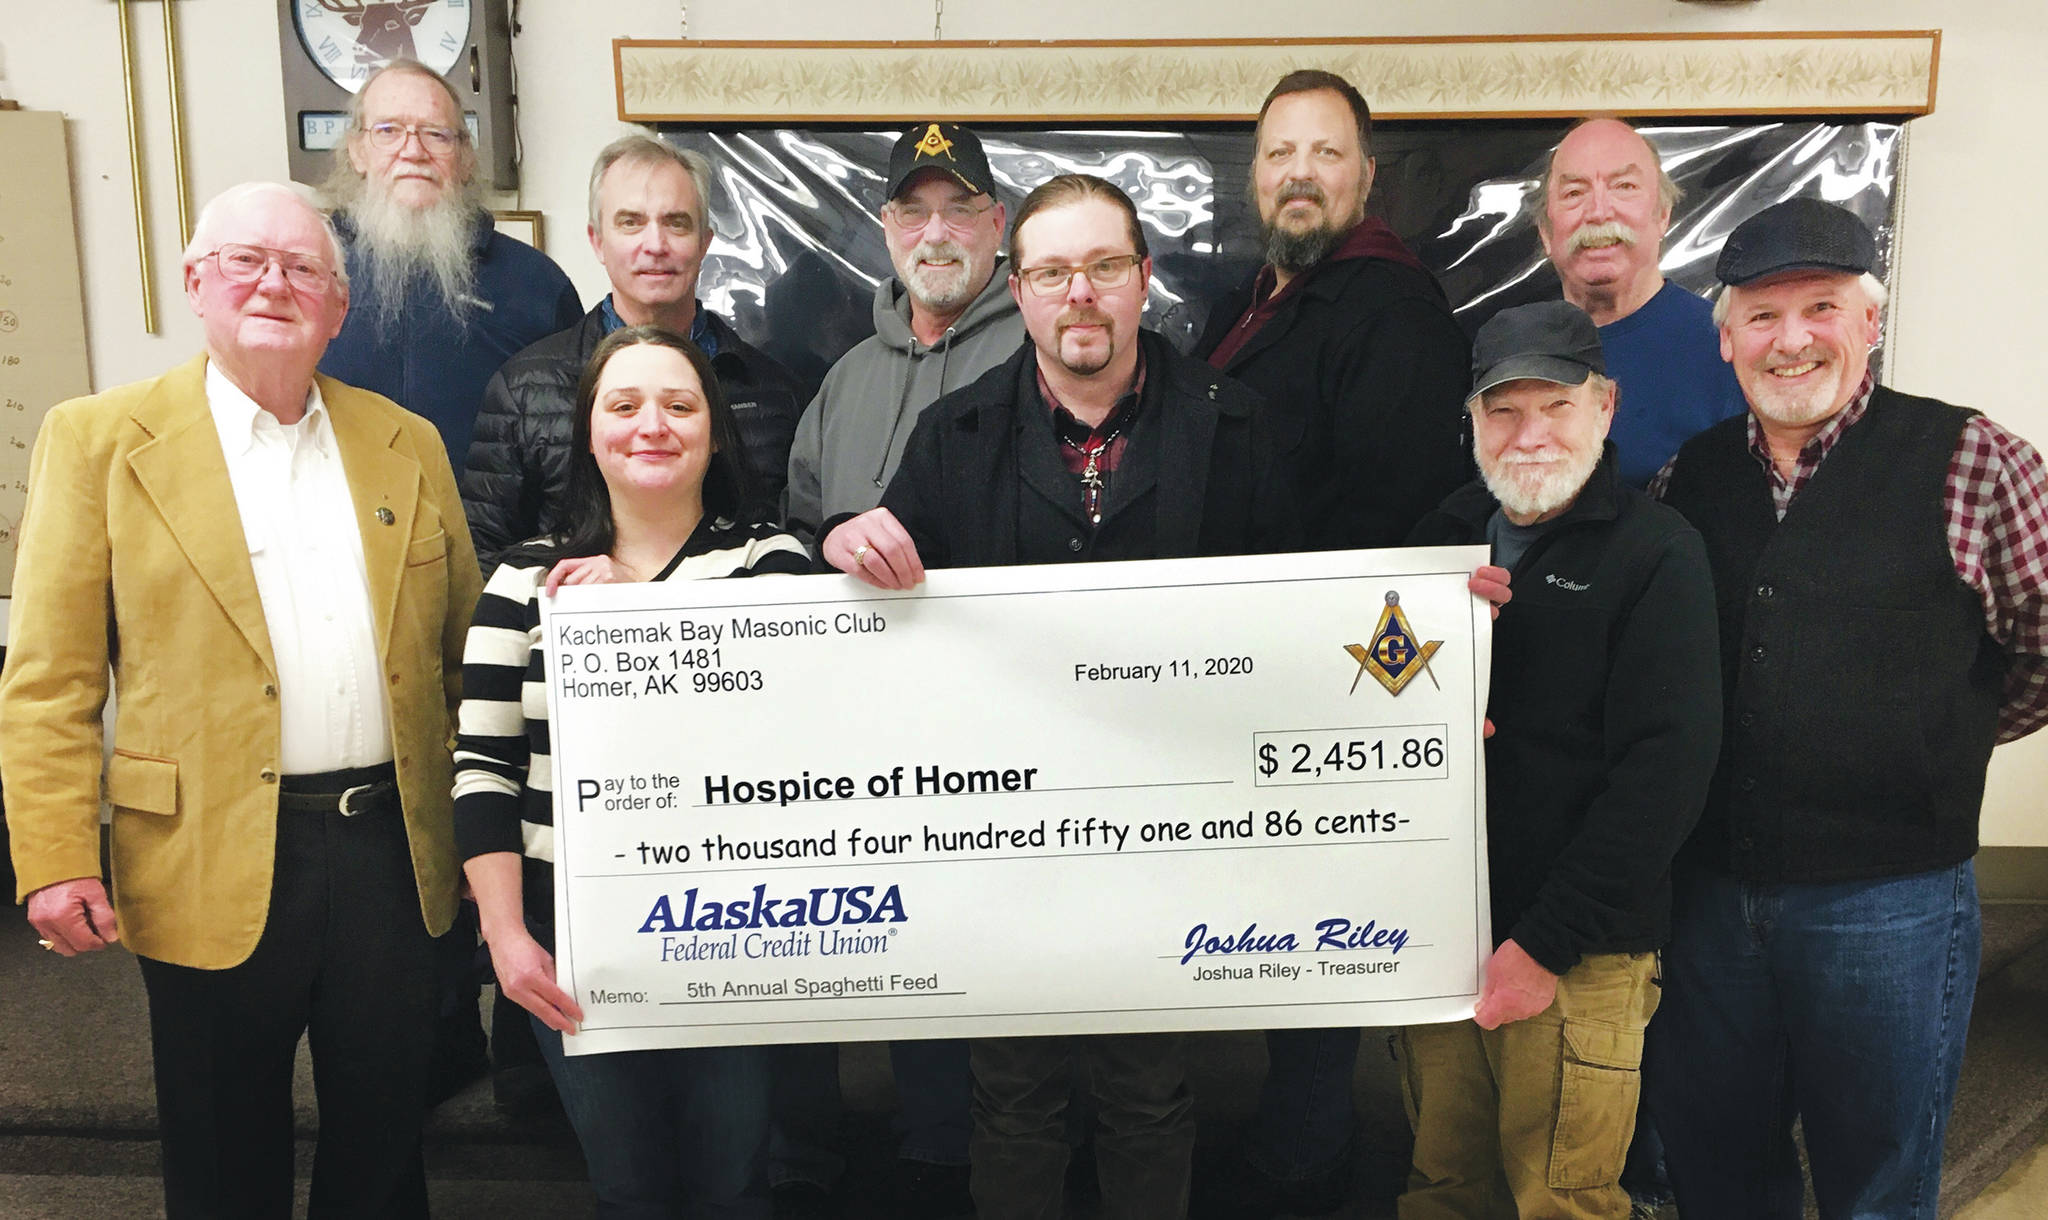 Members of the Kachemak Bay Masonic Club, in cooperation with Homer Elks #2127, held its 5th Annual Masonic Awareness Spaghetti Feed Fundraiser on Jan. 25, 2020, at the Homer Elks Lodge to benefit Hospice of Homer in Homer, Alaska. Proceeds to Hospice totaled $2,451.86. Masons pose here with a celebratory check presented to Hospice of Homer officials. They are, front row, right to left: Doug Baily, Hospice of Homer Executive Director Jessica Golden, Joshua Riley, Hospice of Homer Board member Michael Hawfield, and Tom Stroozas; back row, from left to right, Grady Svoboda, Dave Rush, Barry Haynes, Greg Martin and Jody Murdock. (Photo courtesy of Kachemak Bay Masonic Club)